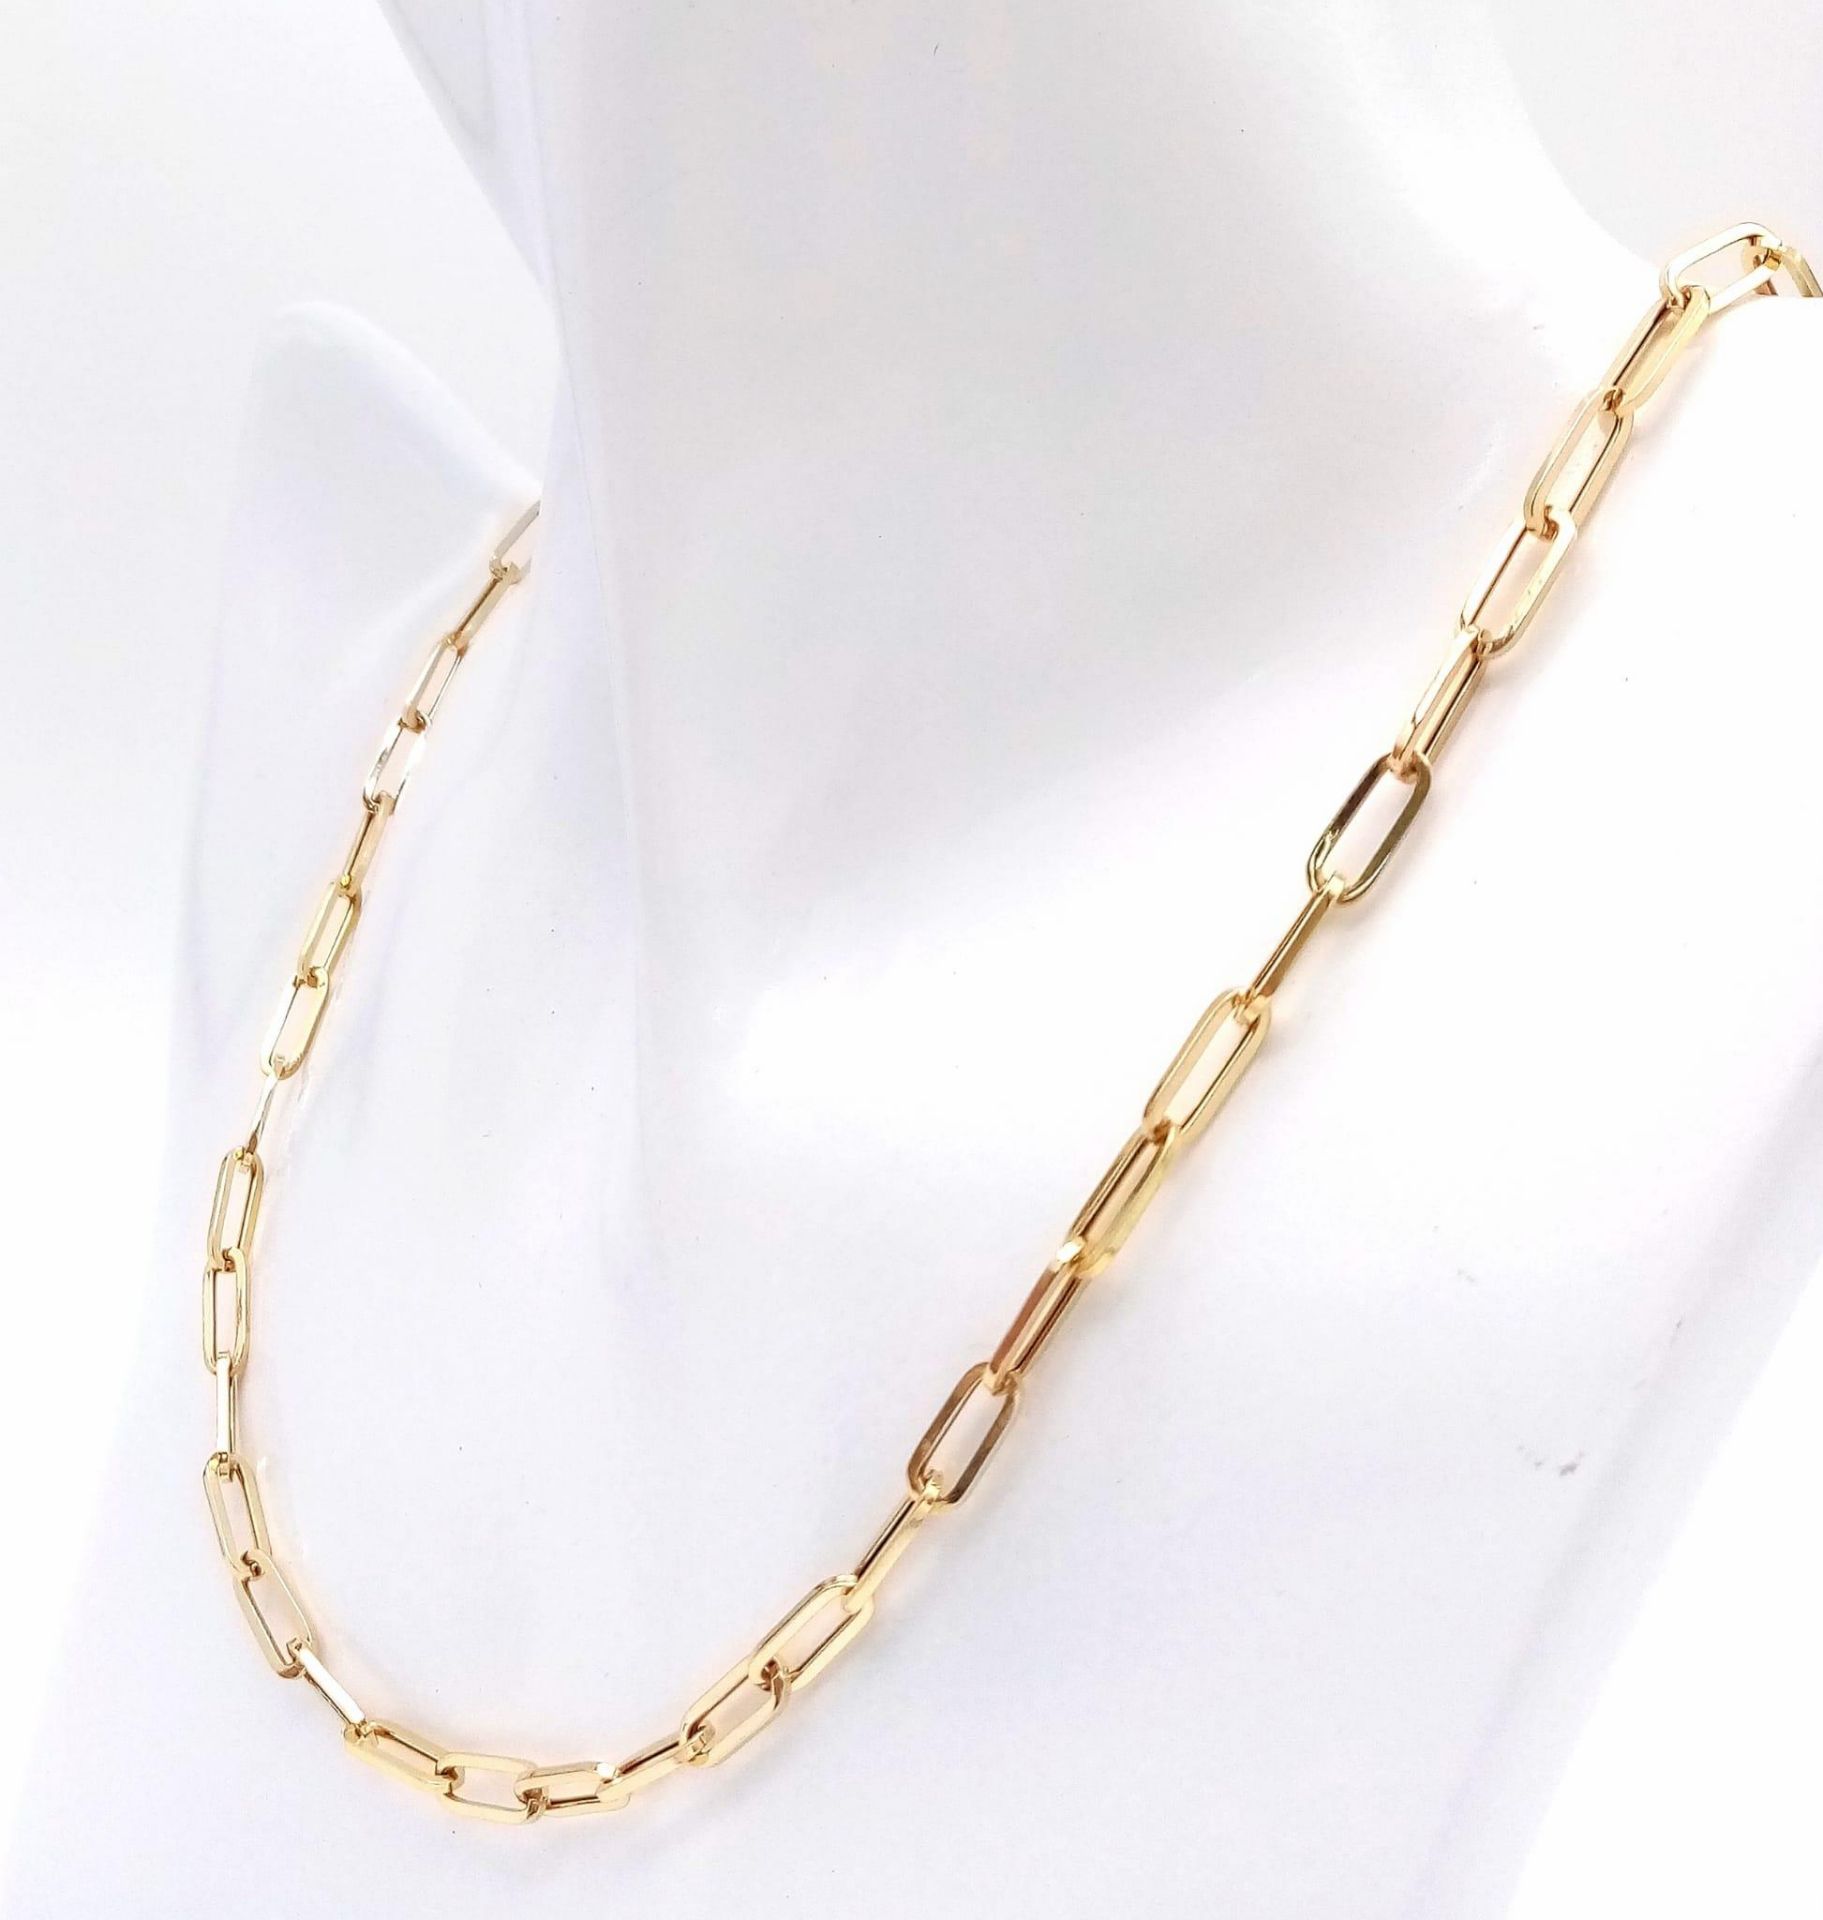 An 18K Yellow Gold Elongated Link Chain. 56cm length. 5.5g weight. - Image 3 of 9